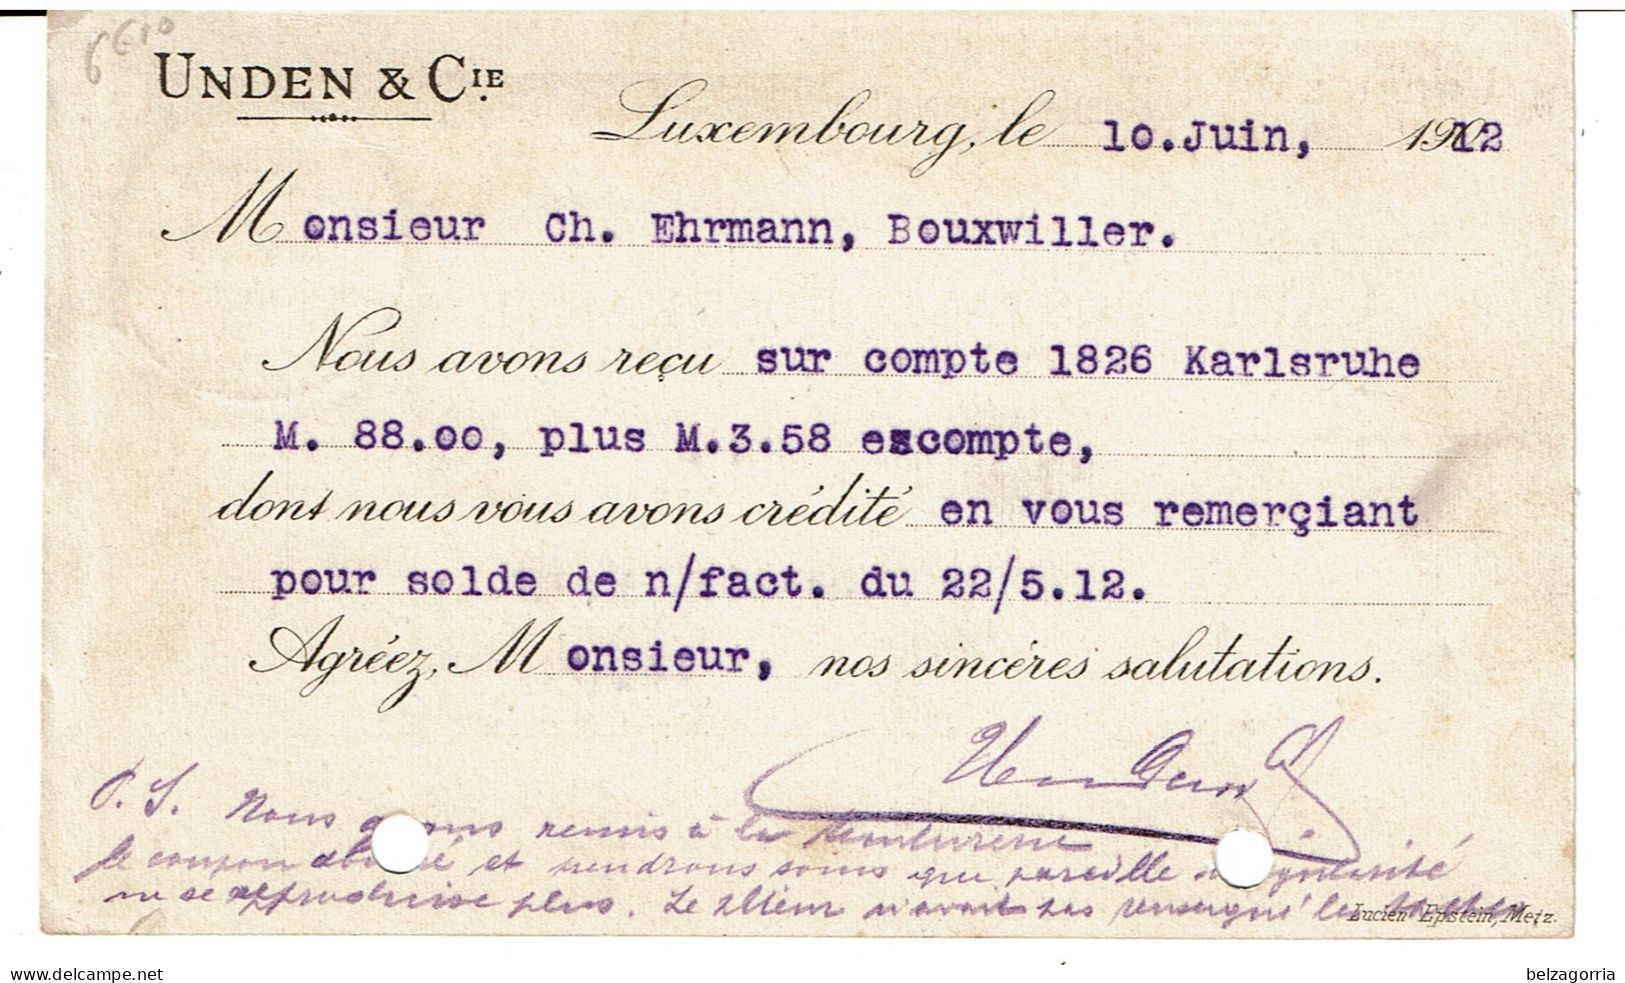 LUXEMBOURG UNDEN & Cie - REMBOURSEMENT  - CARTE COMMERCIALE Du Luxembourg Ville II  à Bouxwiller ( Alsace ) 1912 - - Stamped Stationery